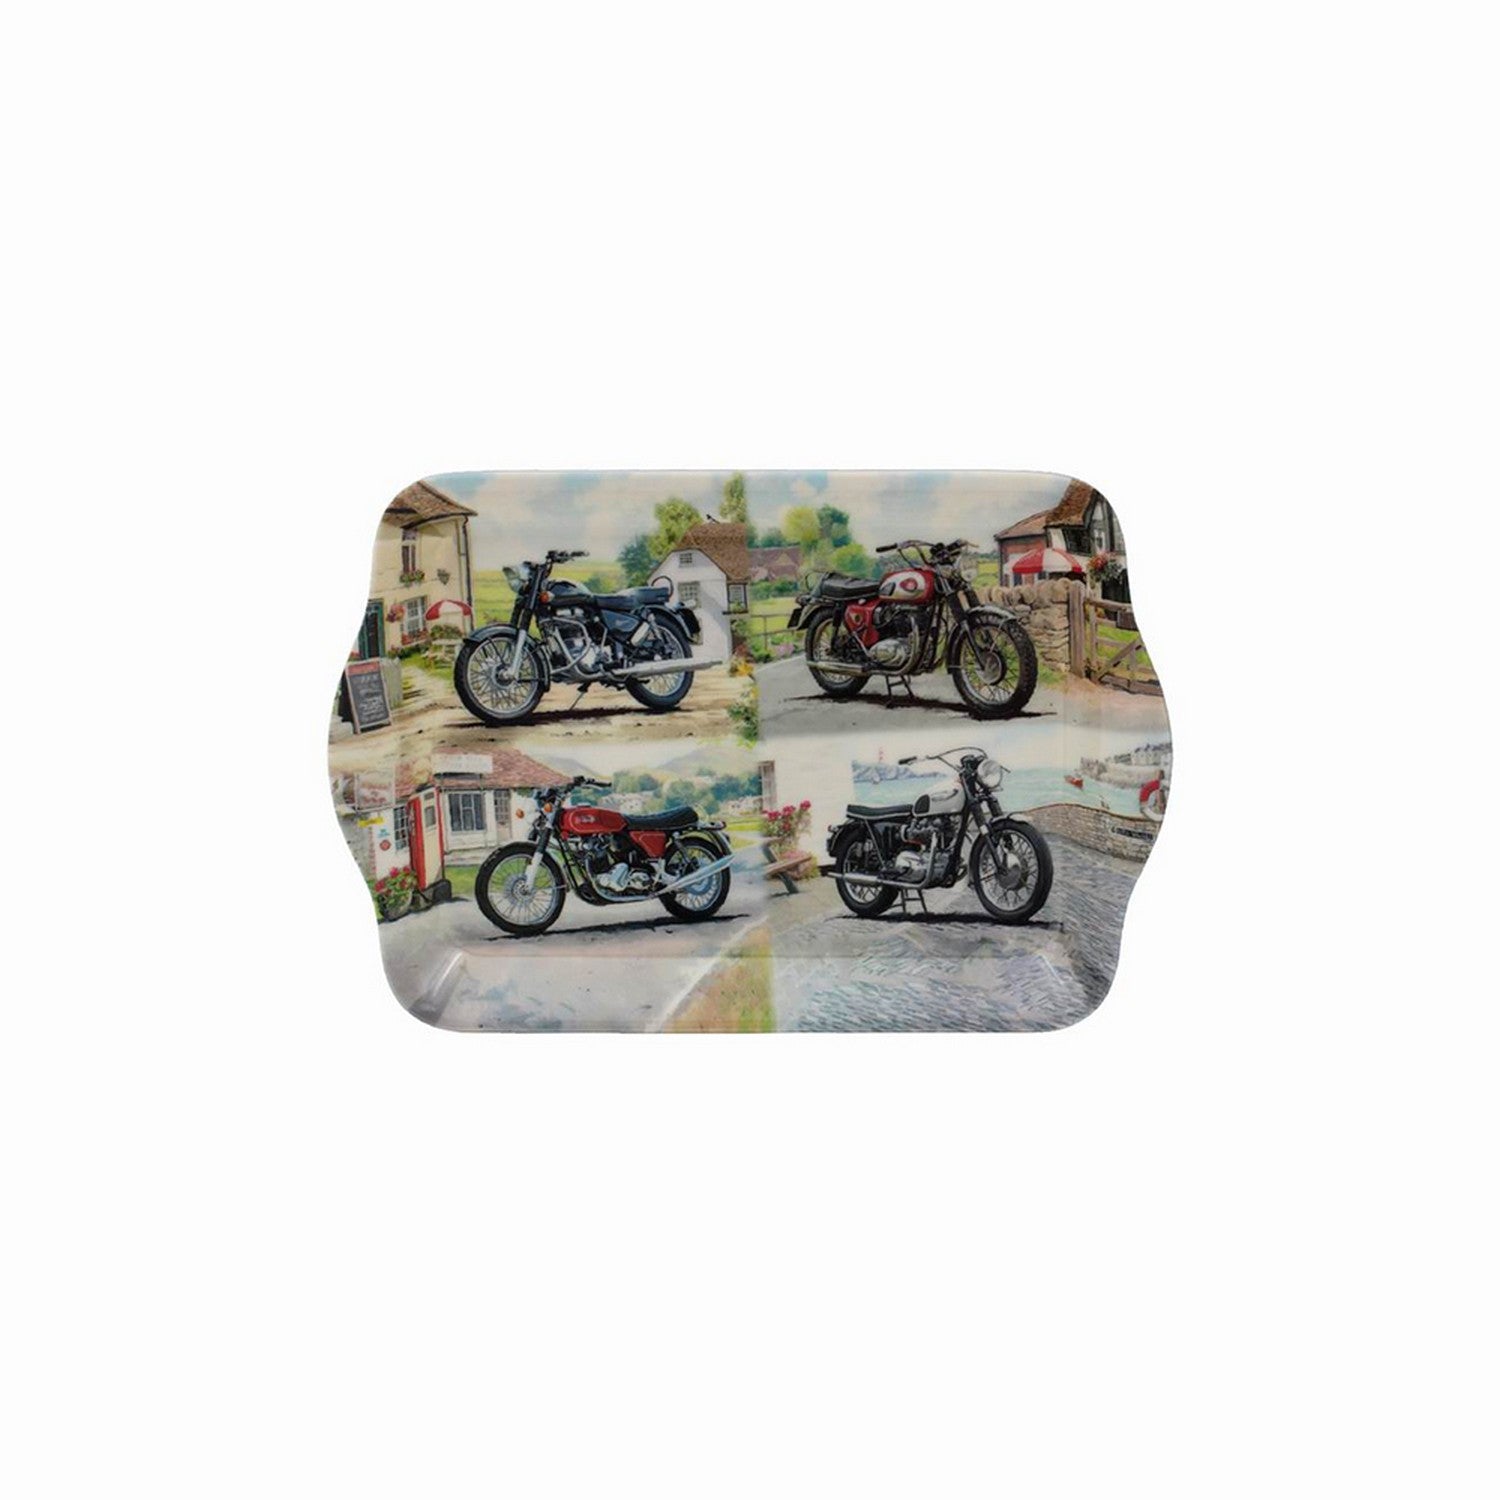 Small Classic Motorbike Design Serving Tray